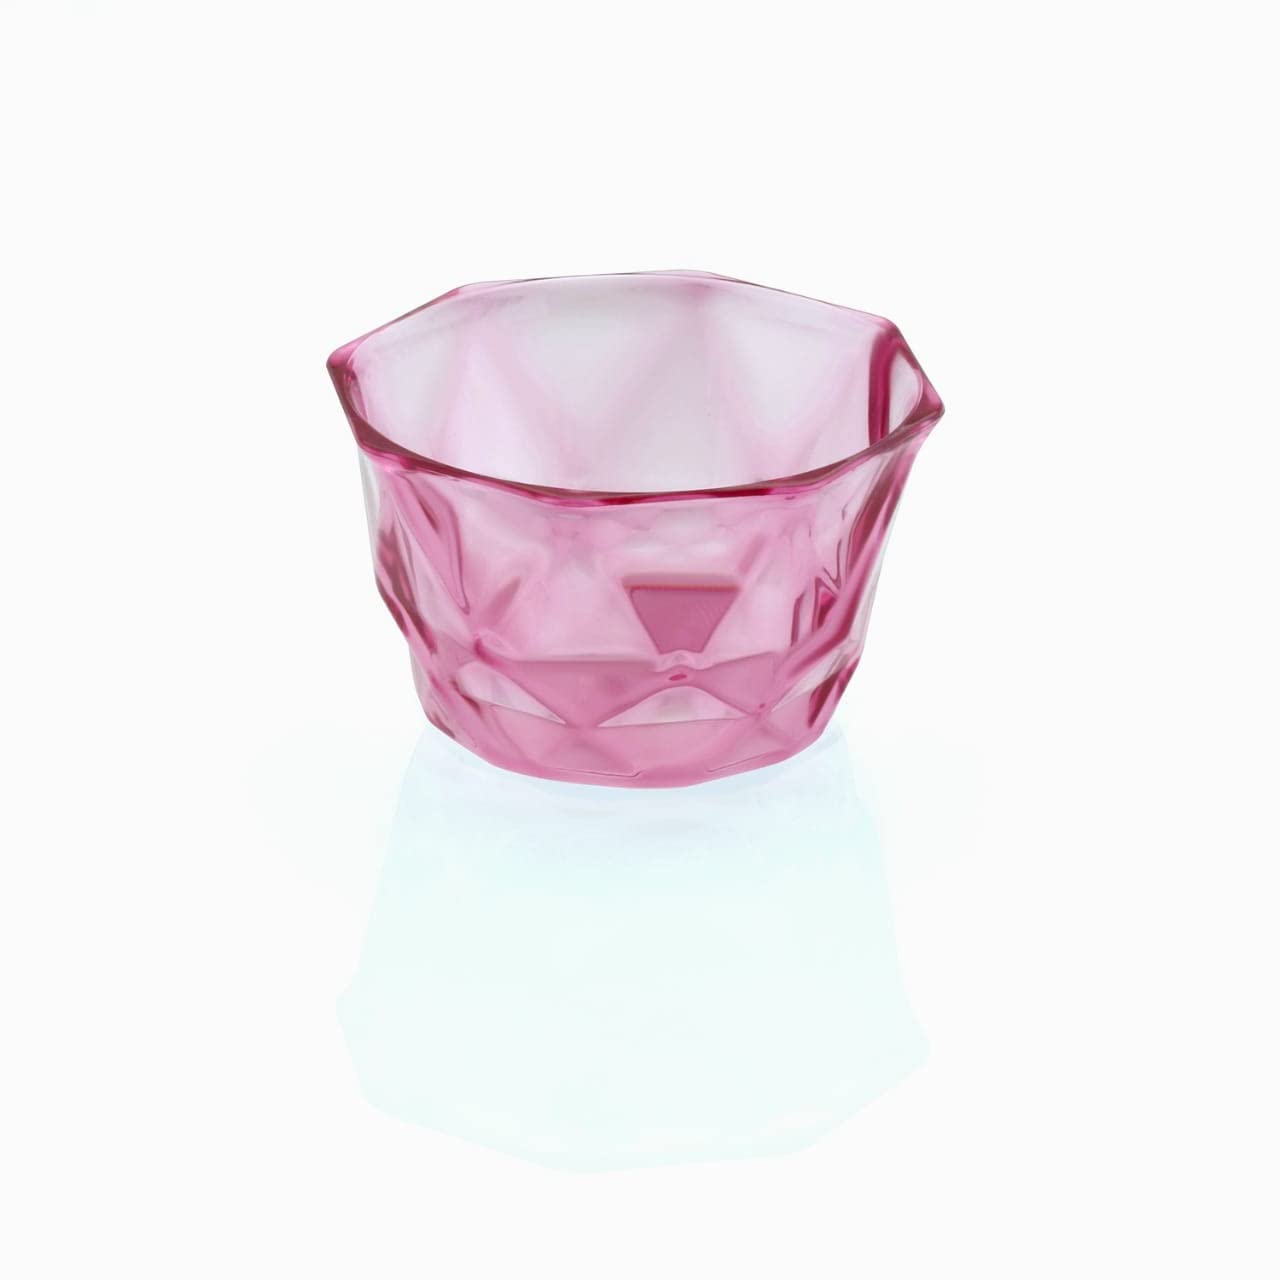 Unbreakable Ice Cream Cup - Home Essentials Store Retail